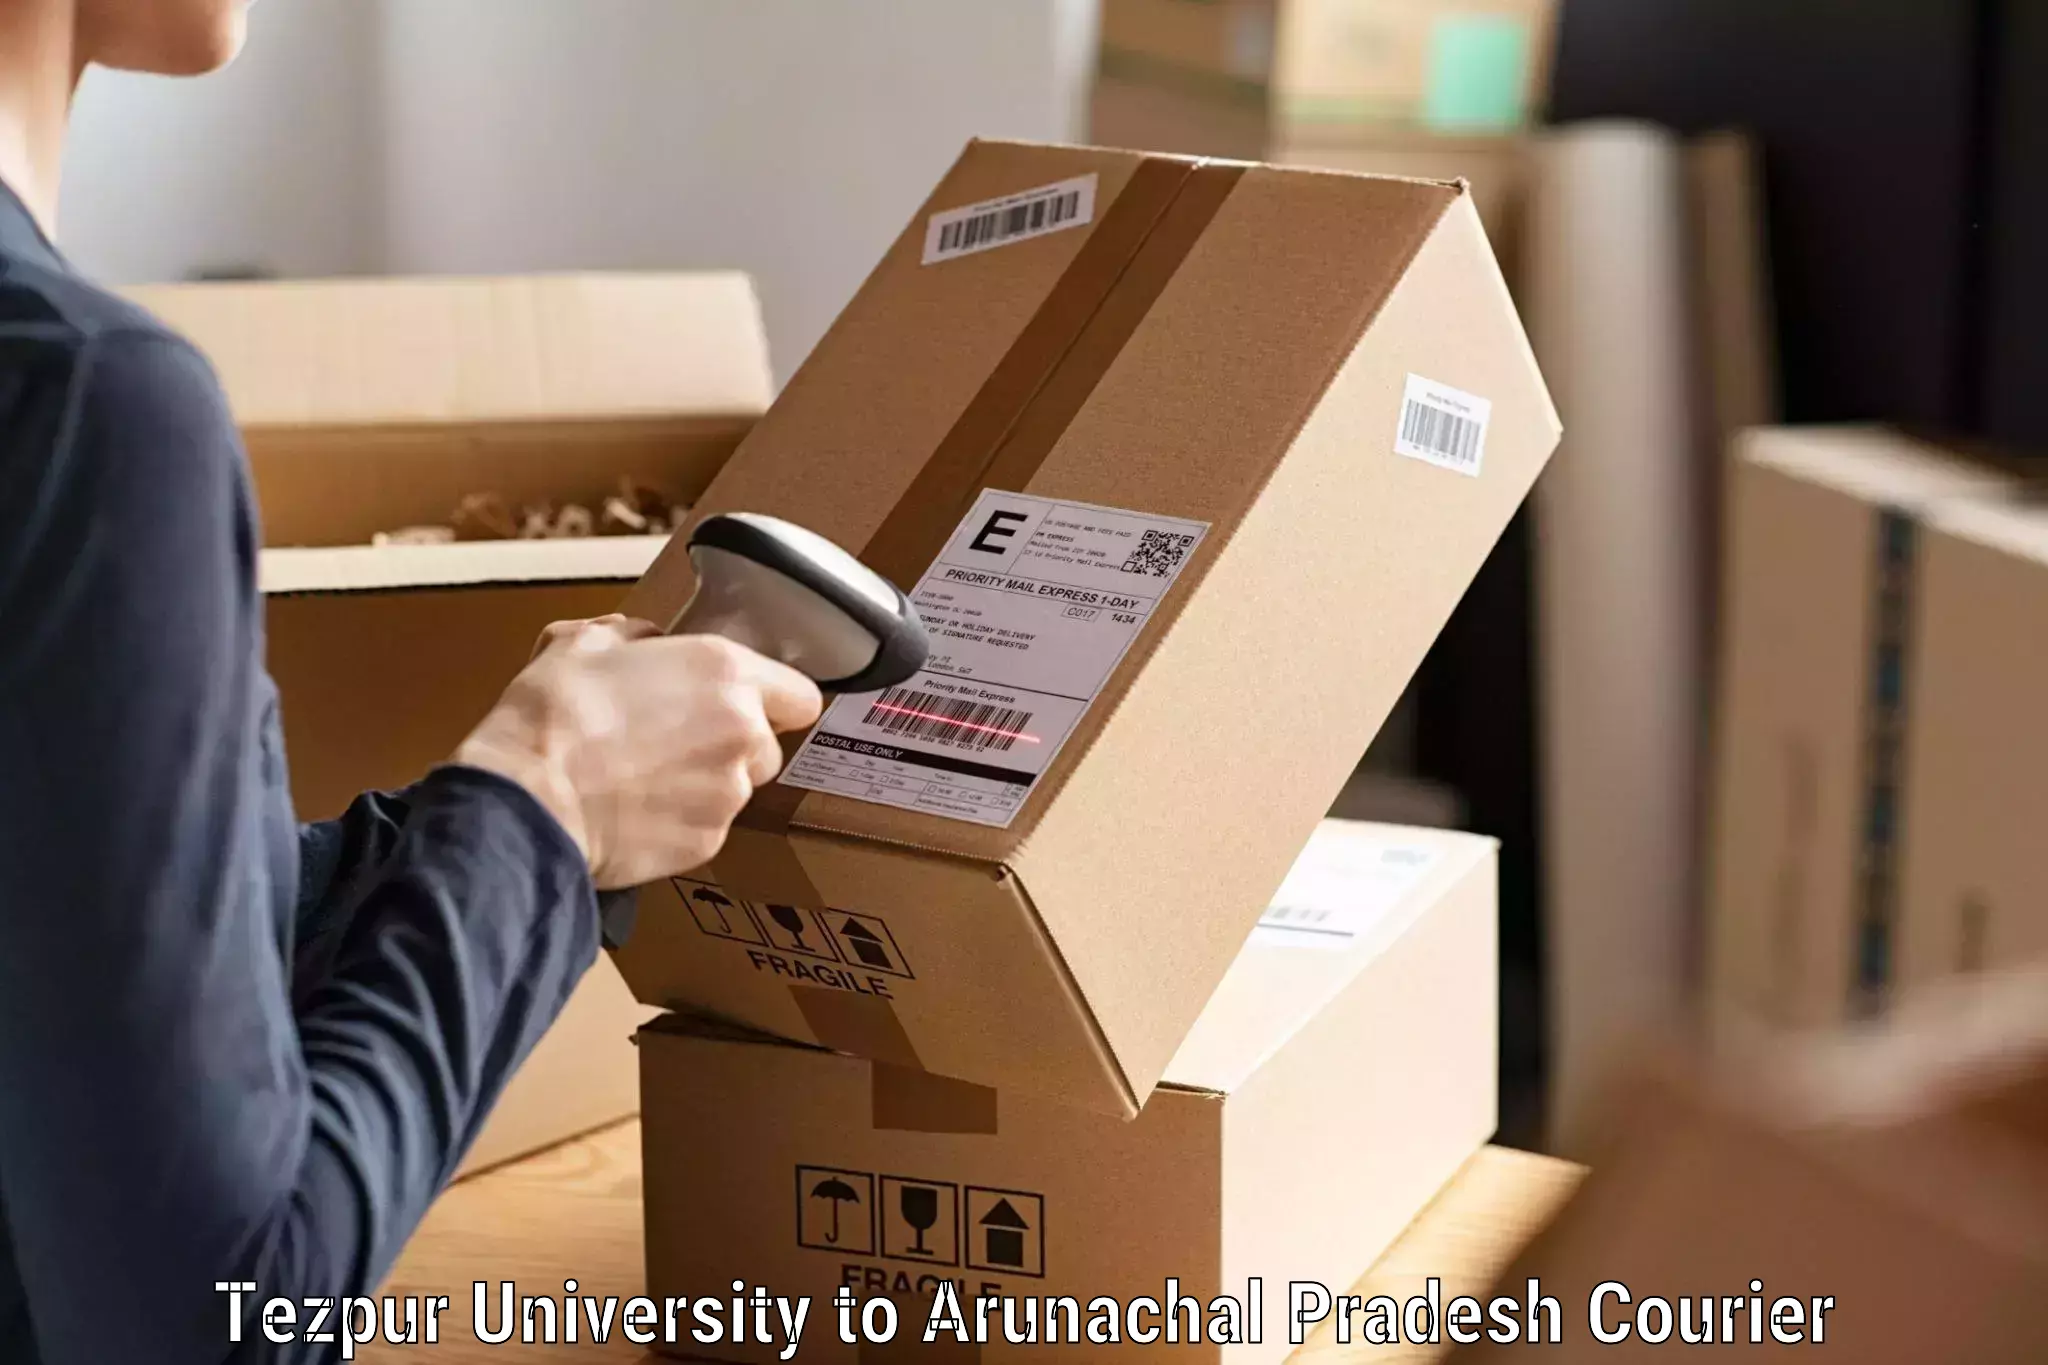 Professional courier handling Tezpur University to Yingkiong